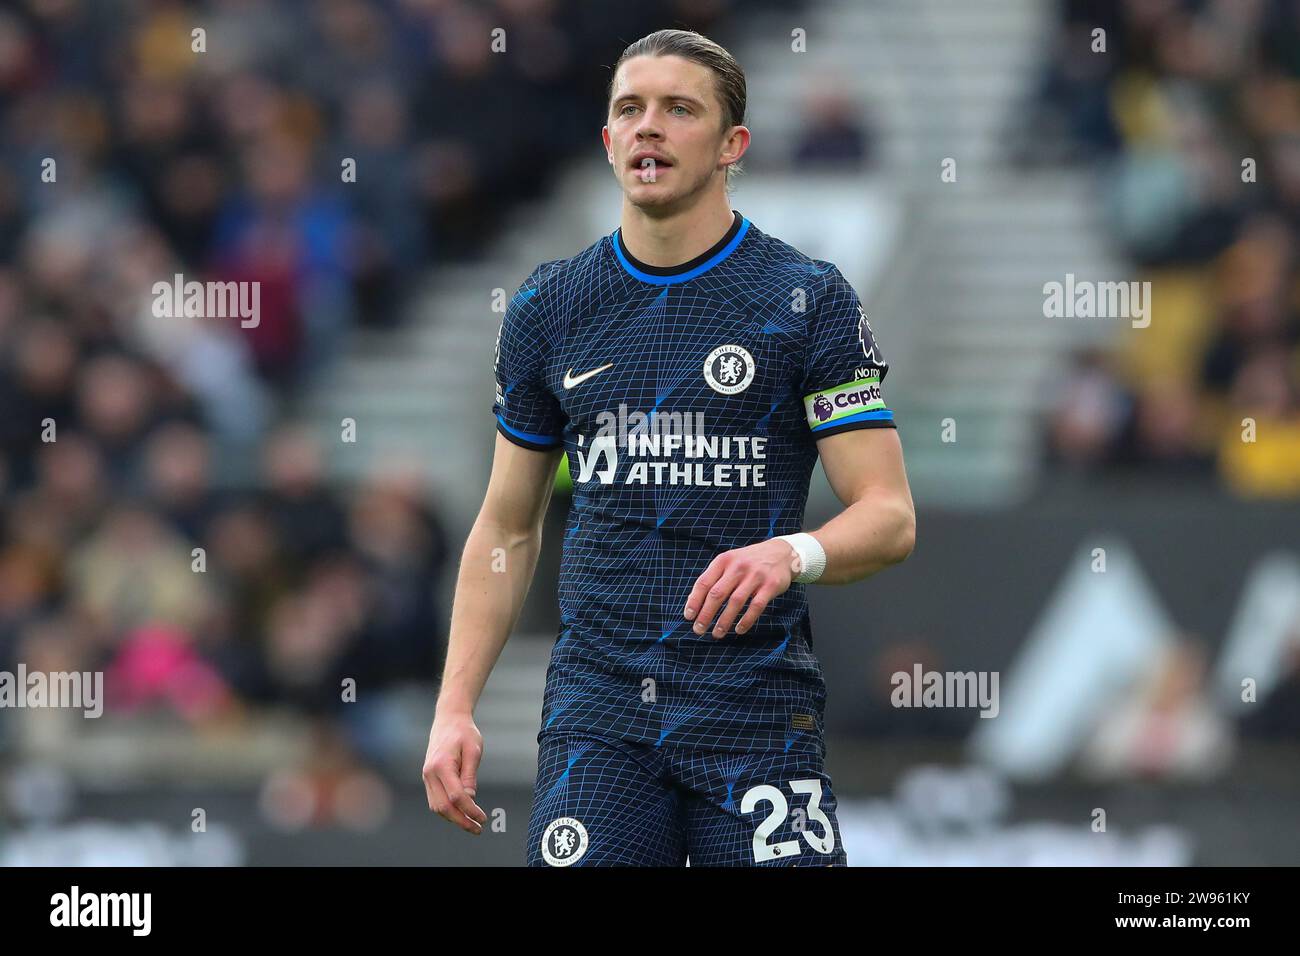 Wolverhampton, UK. 24th Dec, 2023. Conor Gallagher of Chelsea during the Premier League match Wolverhampton Wanderers vs Chelsea at Molineux, Wolverhampton, United Kingdom, 24th December 2023 (Photo by Gareth Evans/News Images) Credit: News Images LTD/Alamy Live News Stock Photo